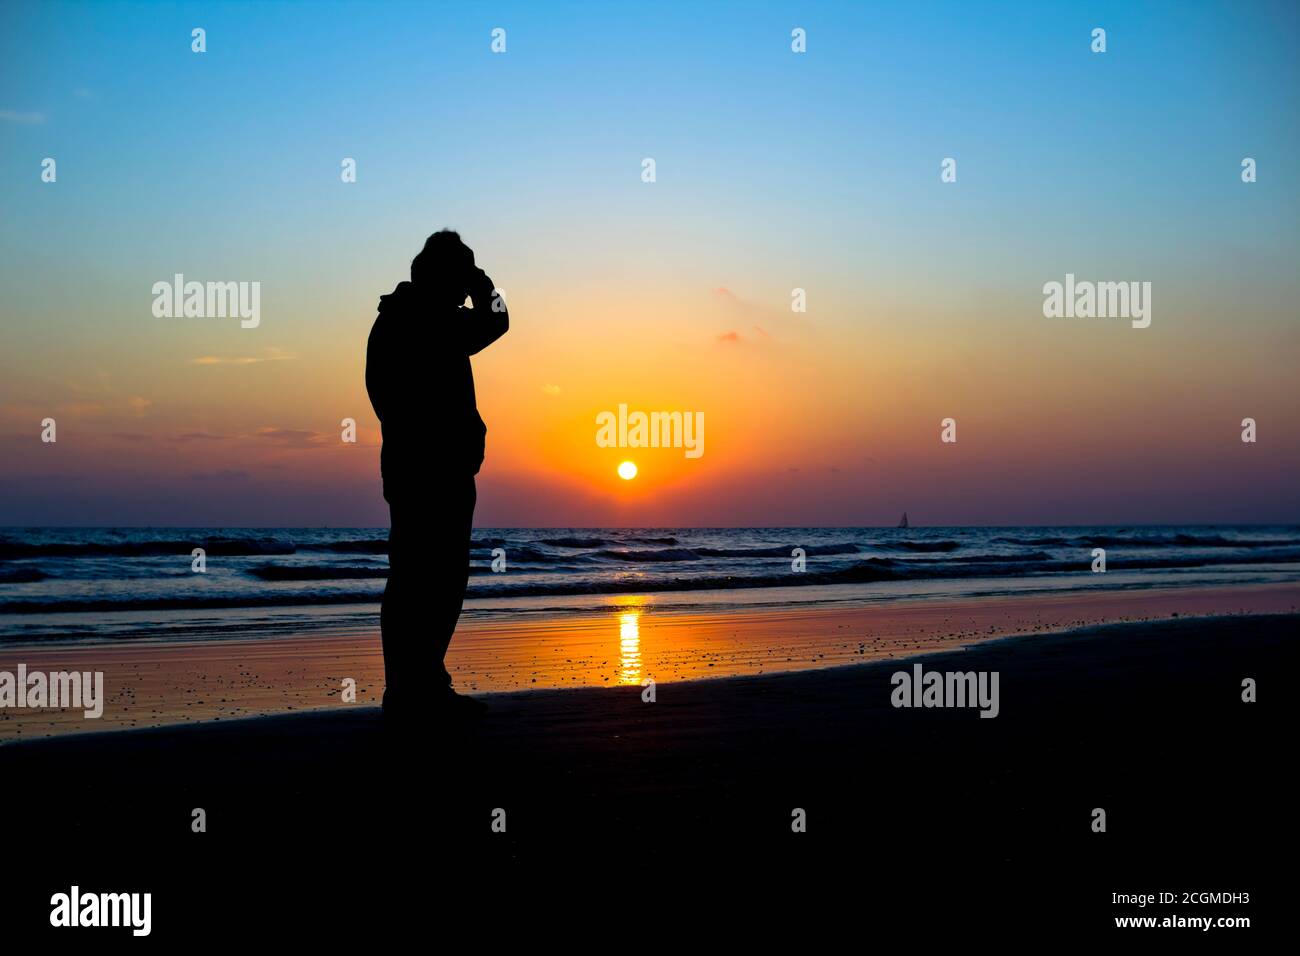 Man silhouetted against a vivid ocean sunset Stock Photo